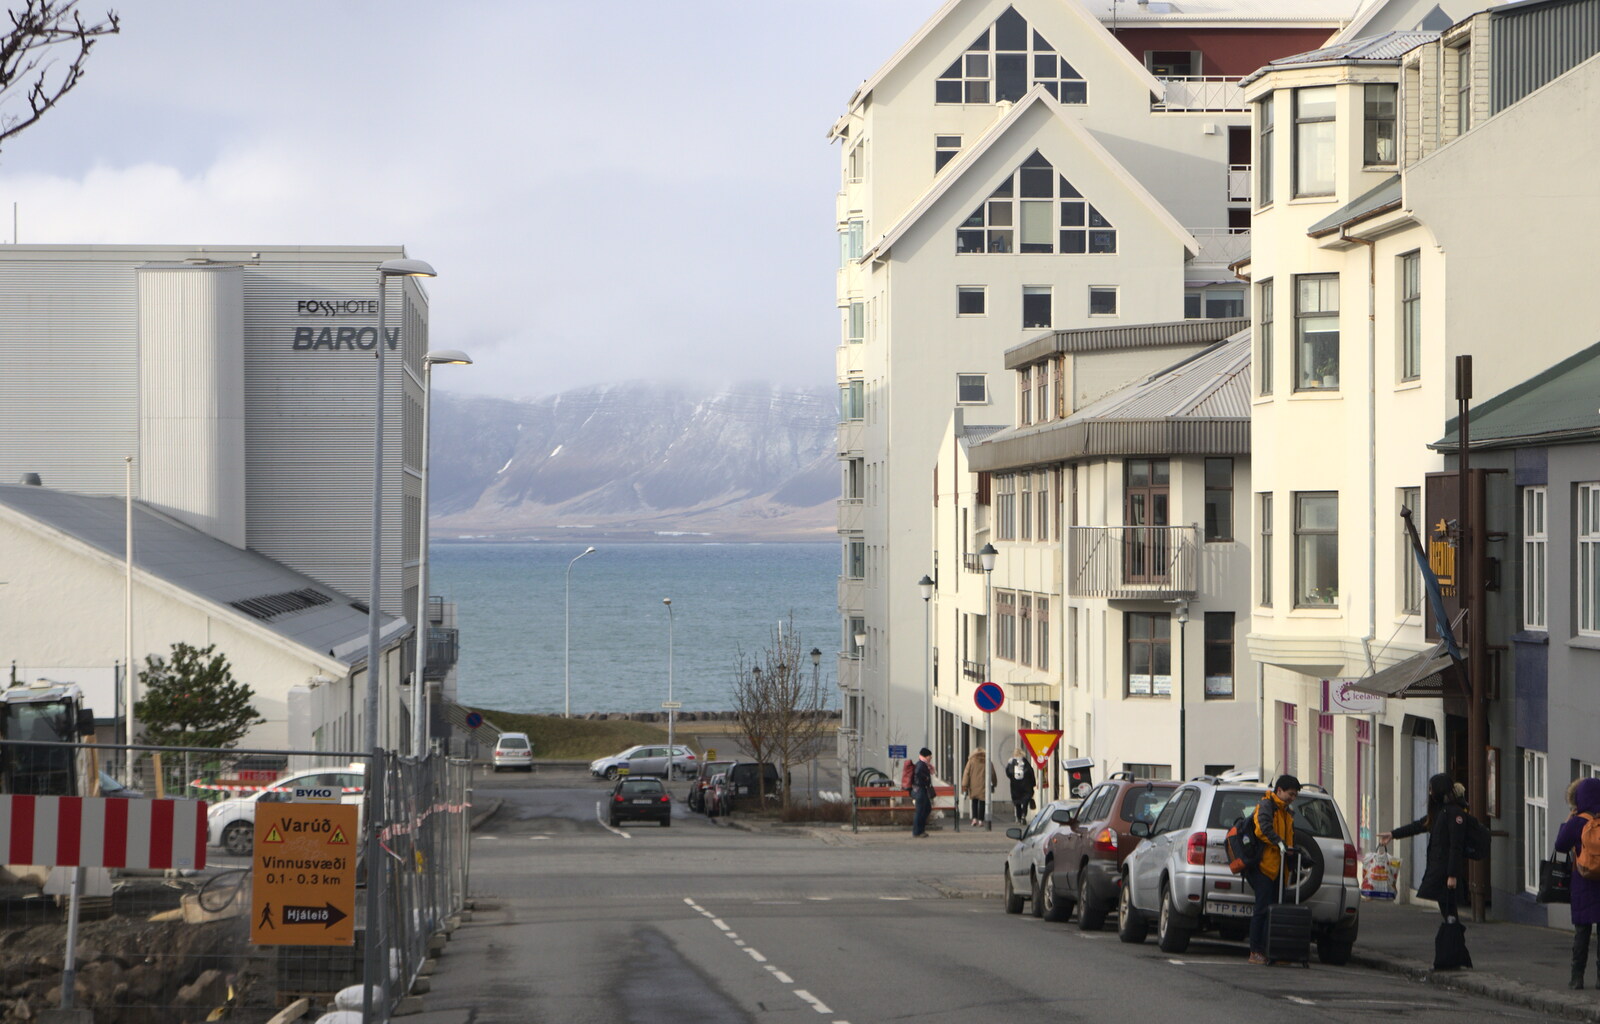 A view down to Faxaflói bay from A Trip to Reykjavik, Iceland - 20th April 2017